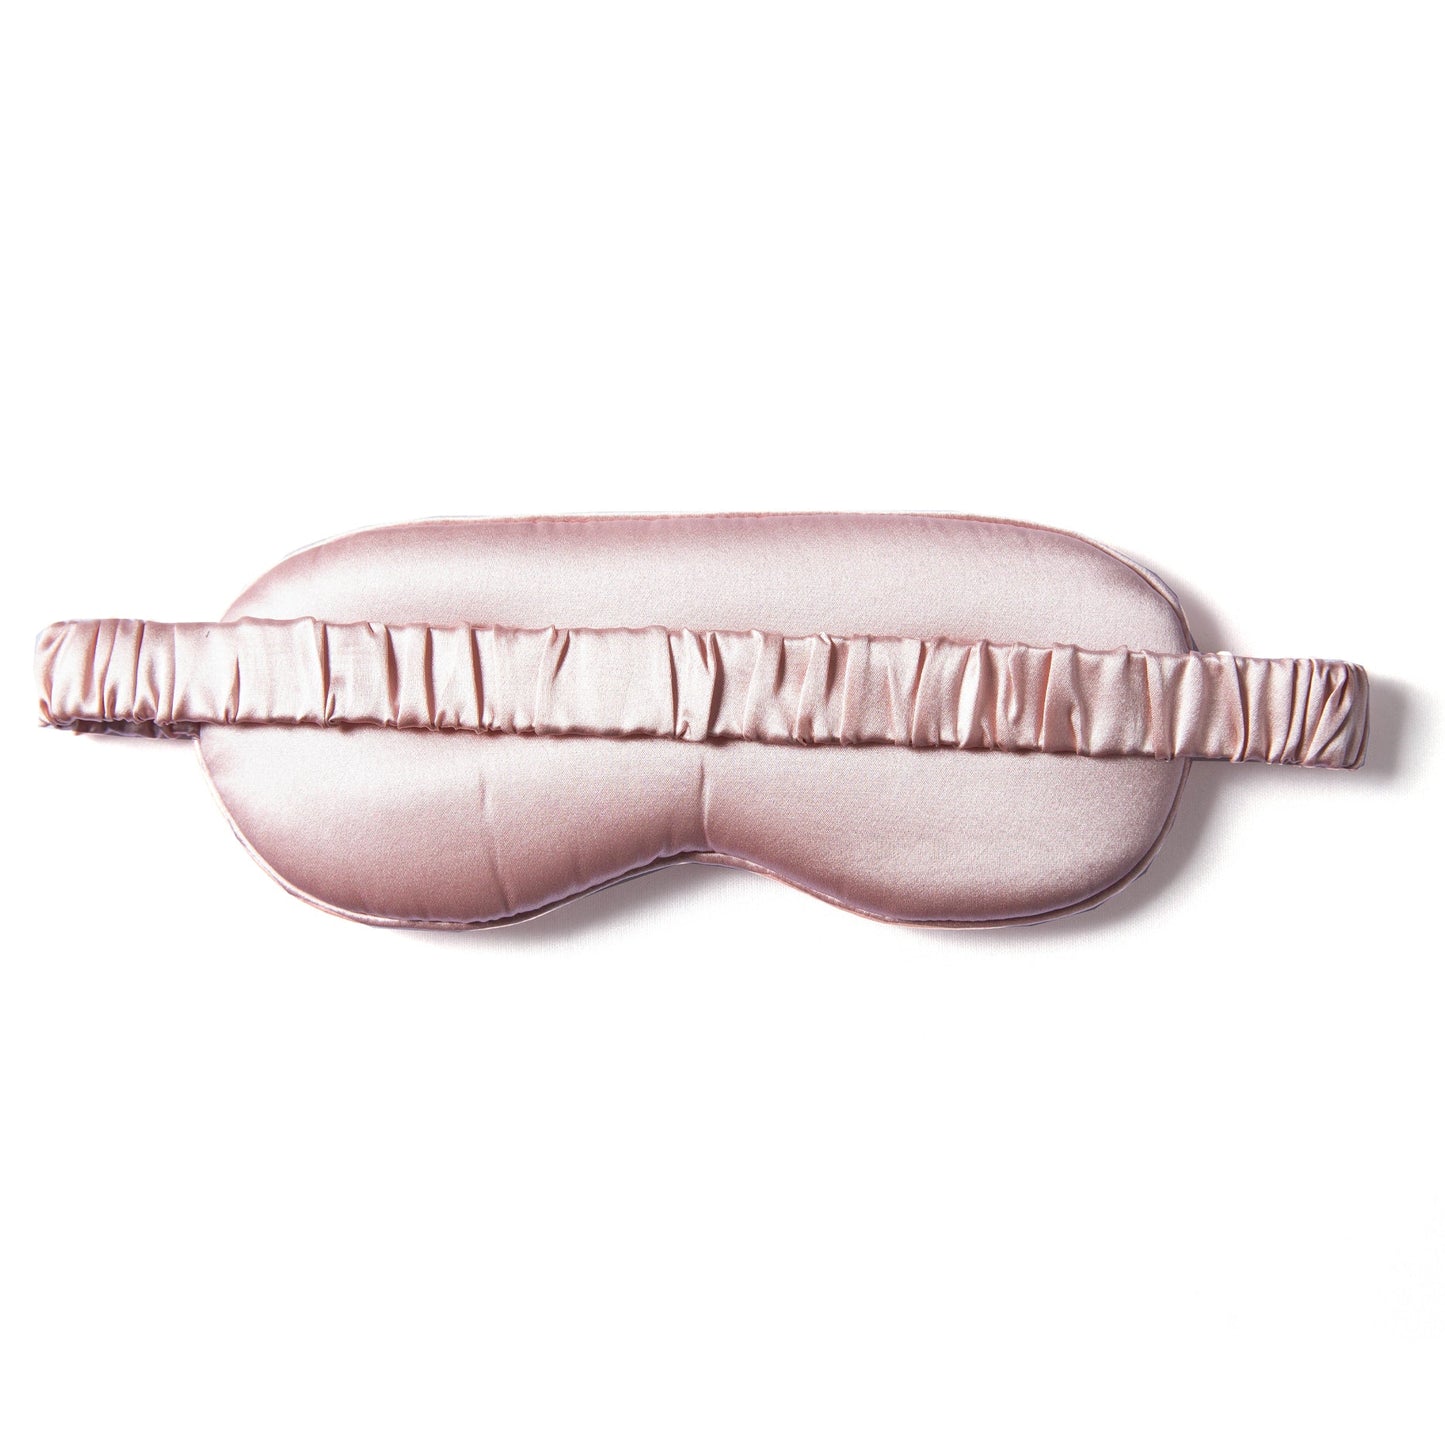 Mulberry Silk Eye Mask | Blush Pink Sleep Mask from Helen Loveday for 22